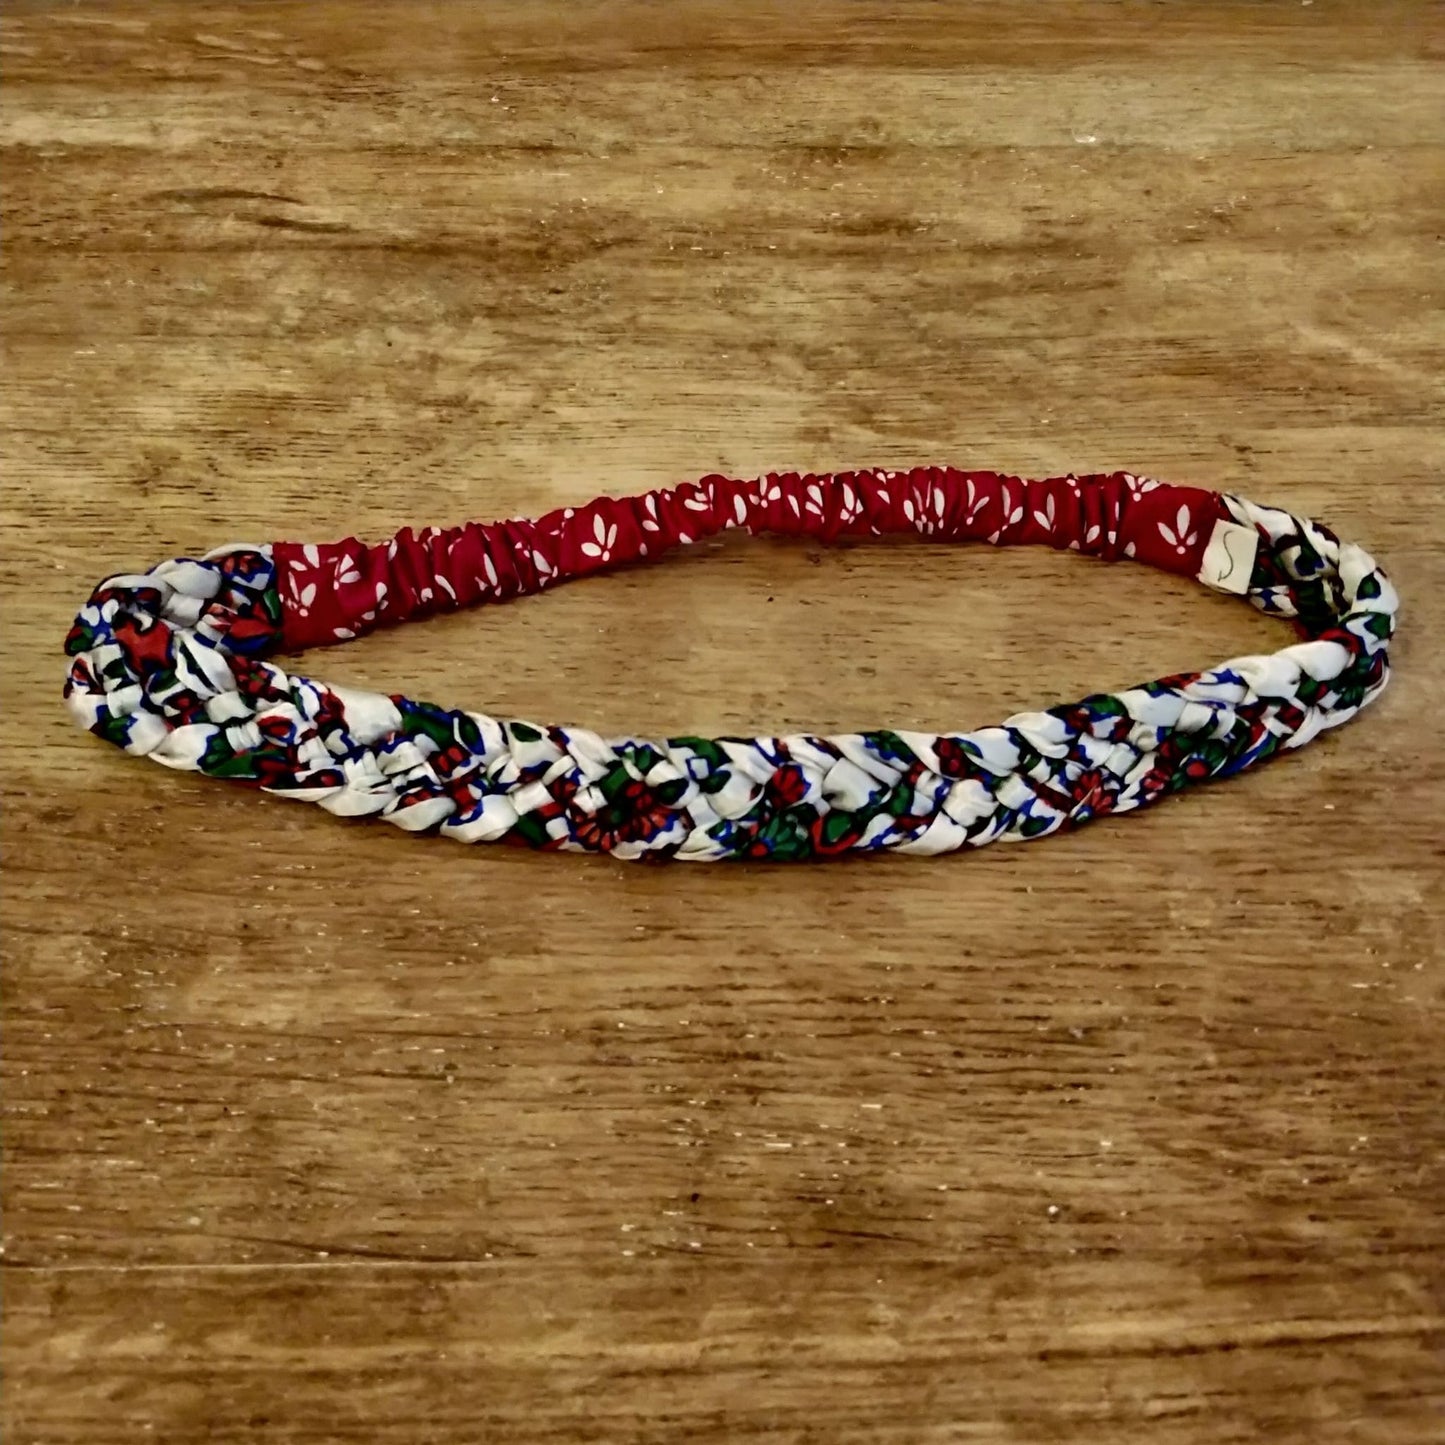 Braided Sari Headband Empowering Women in India - red hair accessory on wooden table